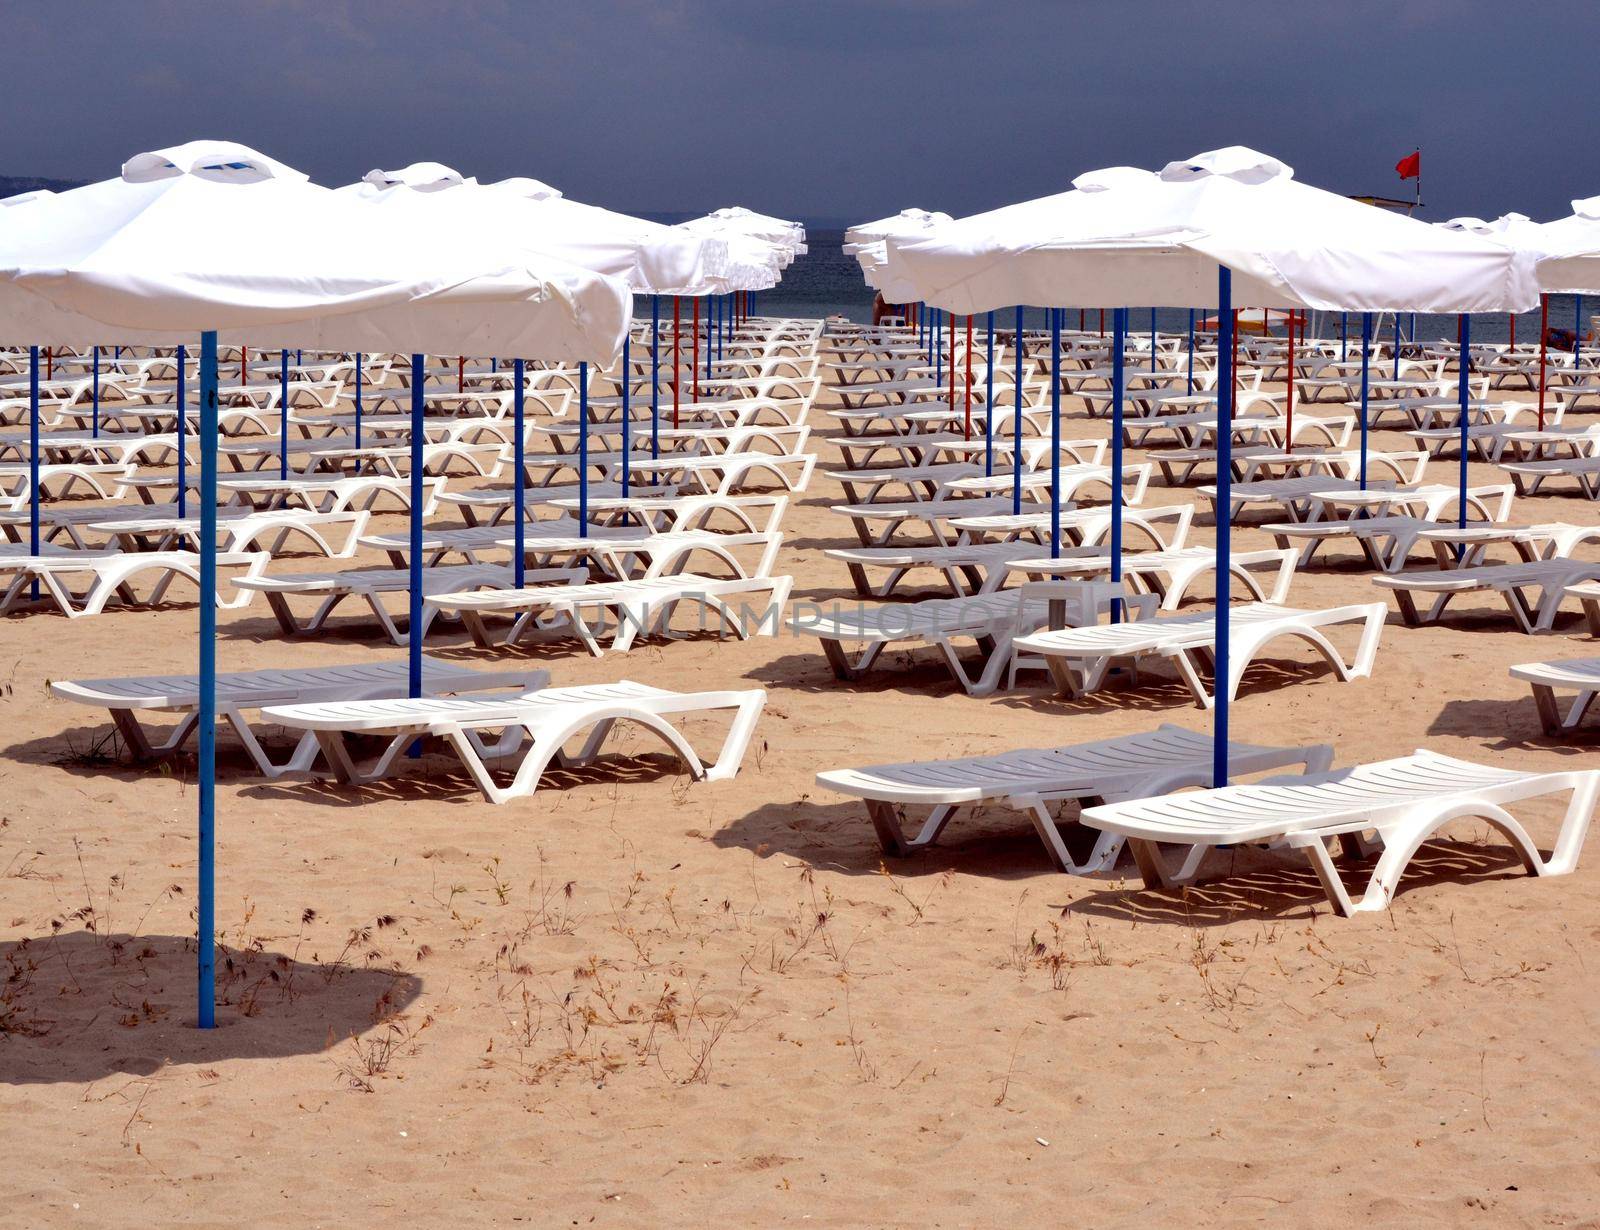 A lot of beach umbrellas and sun beds with a view of a horizon line over the sea by hibrida13